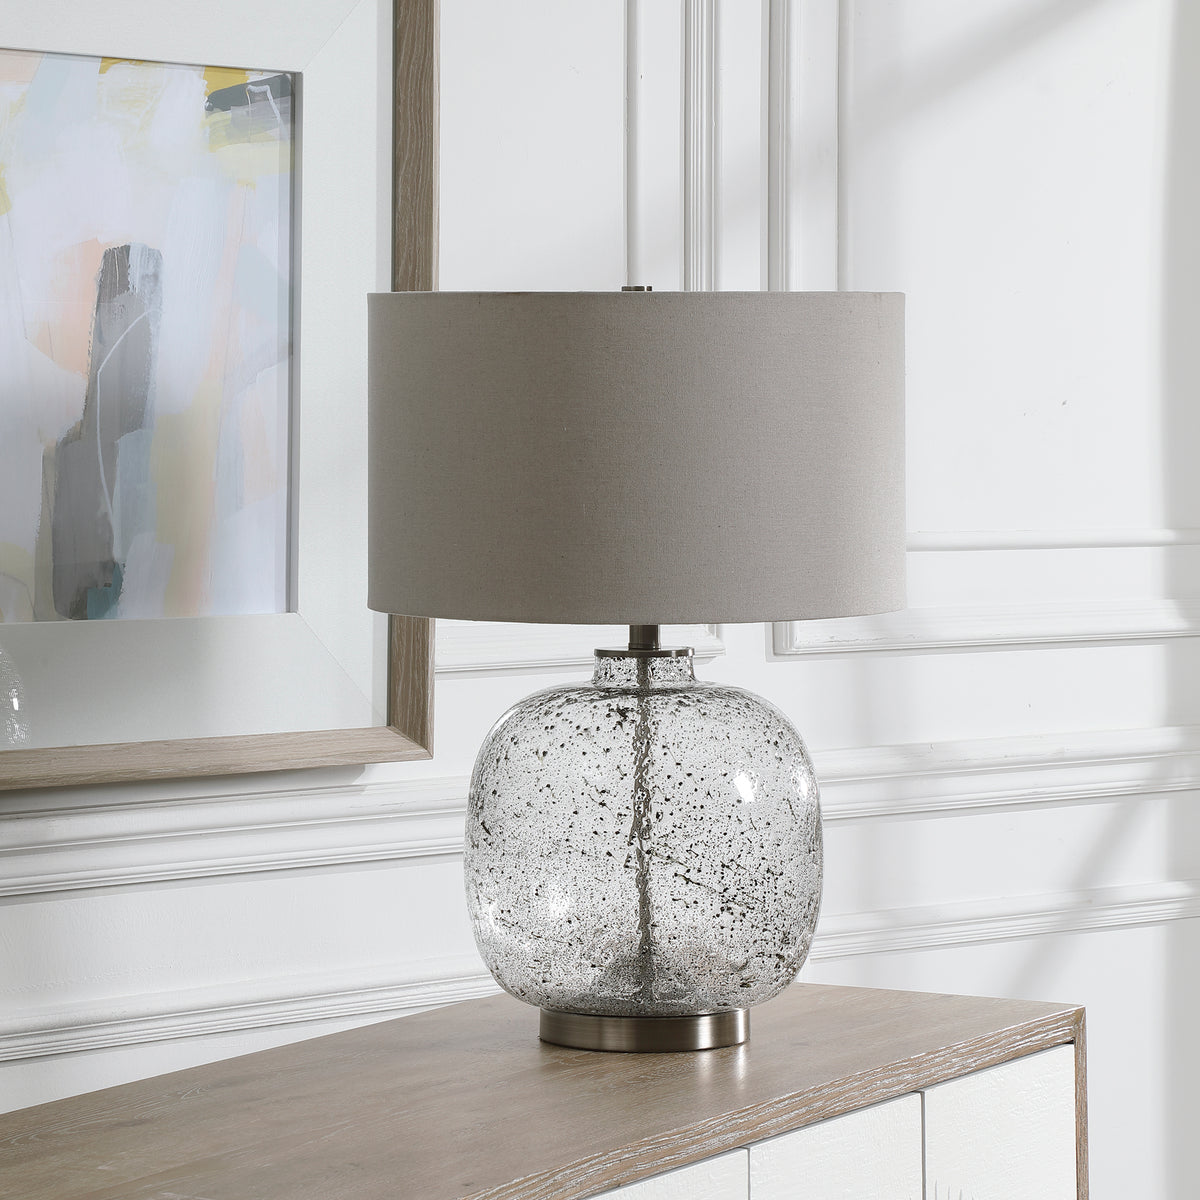 Storm Table Lamp